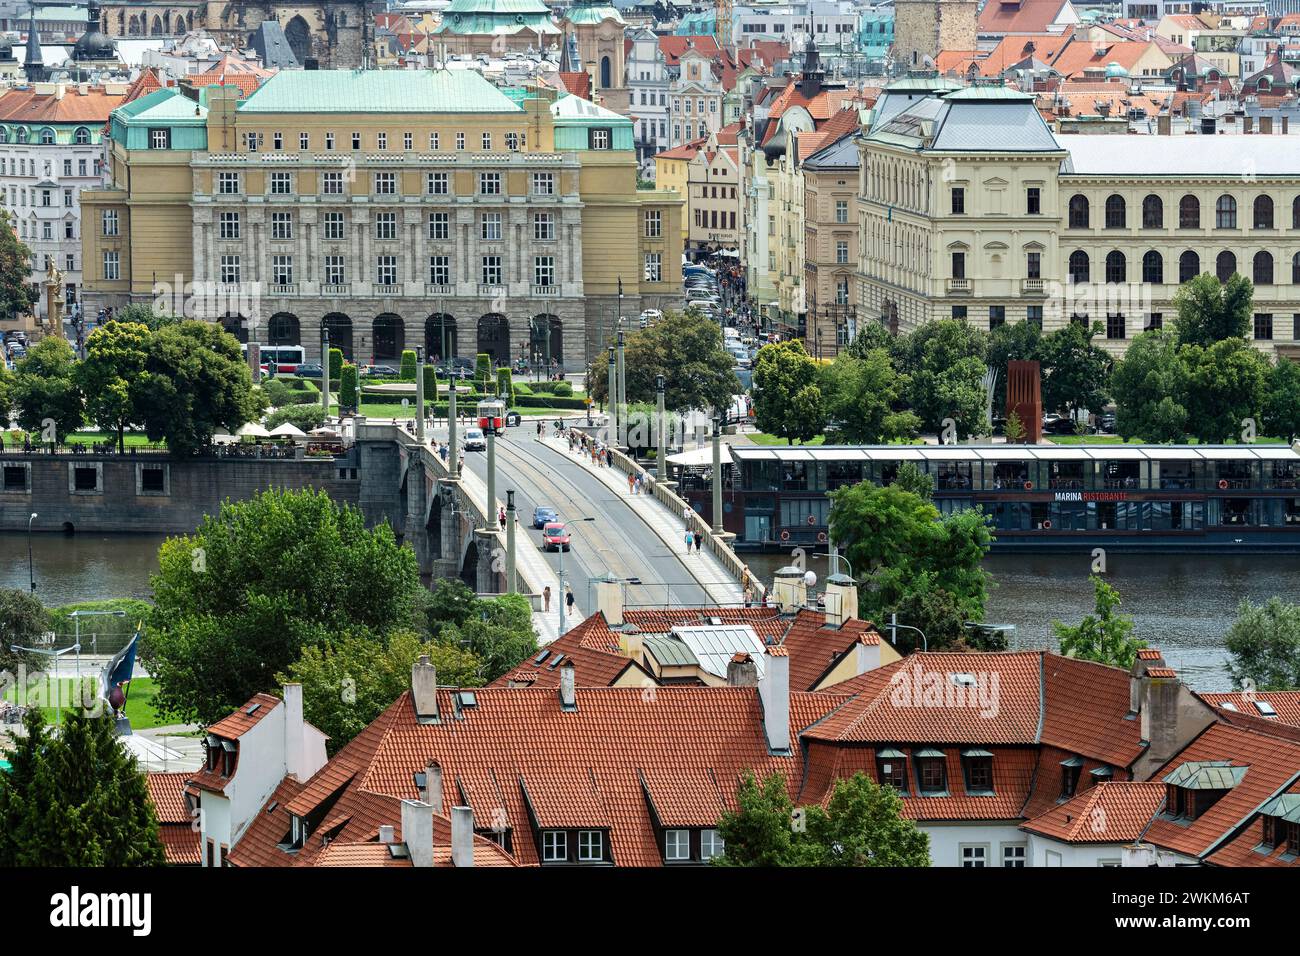 Prague, Czech Republic, July 26: View of the Vlatva river and Manes Bridge in the city of Prague, July 26, 2022. Stock Photo